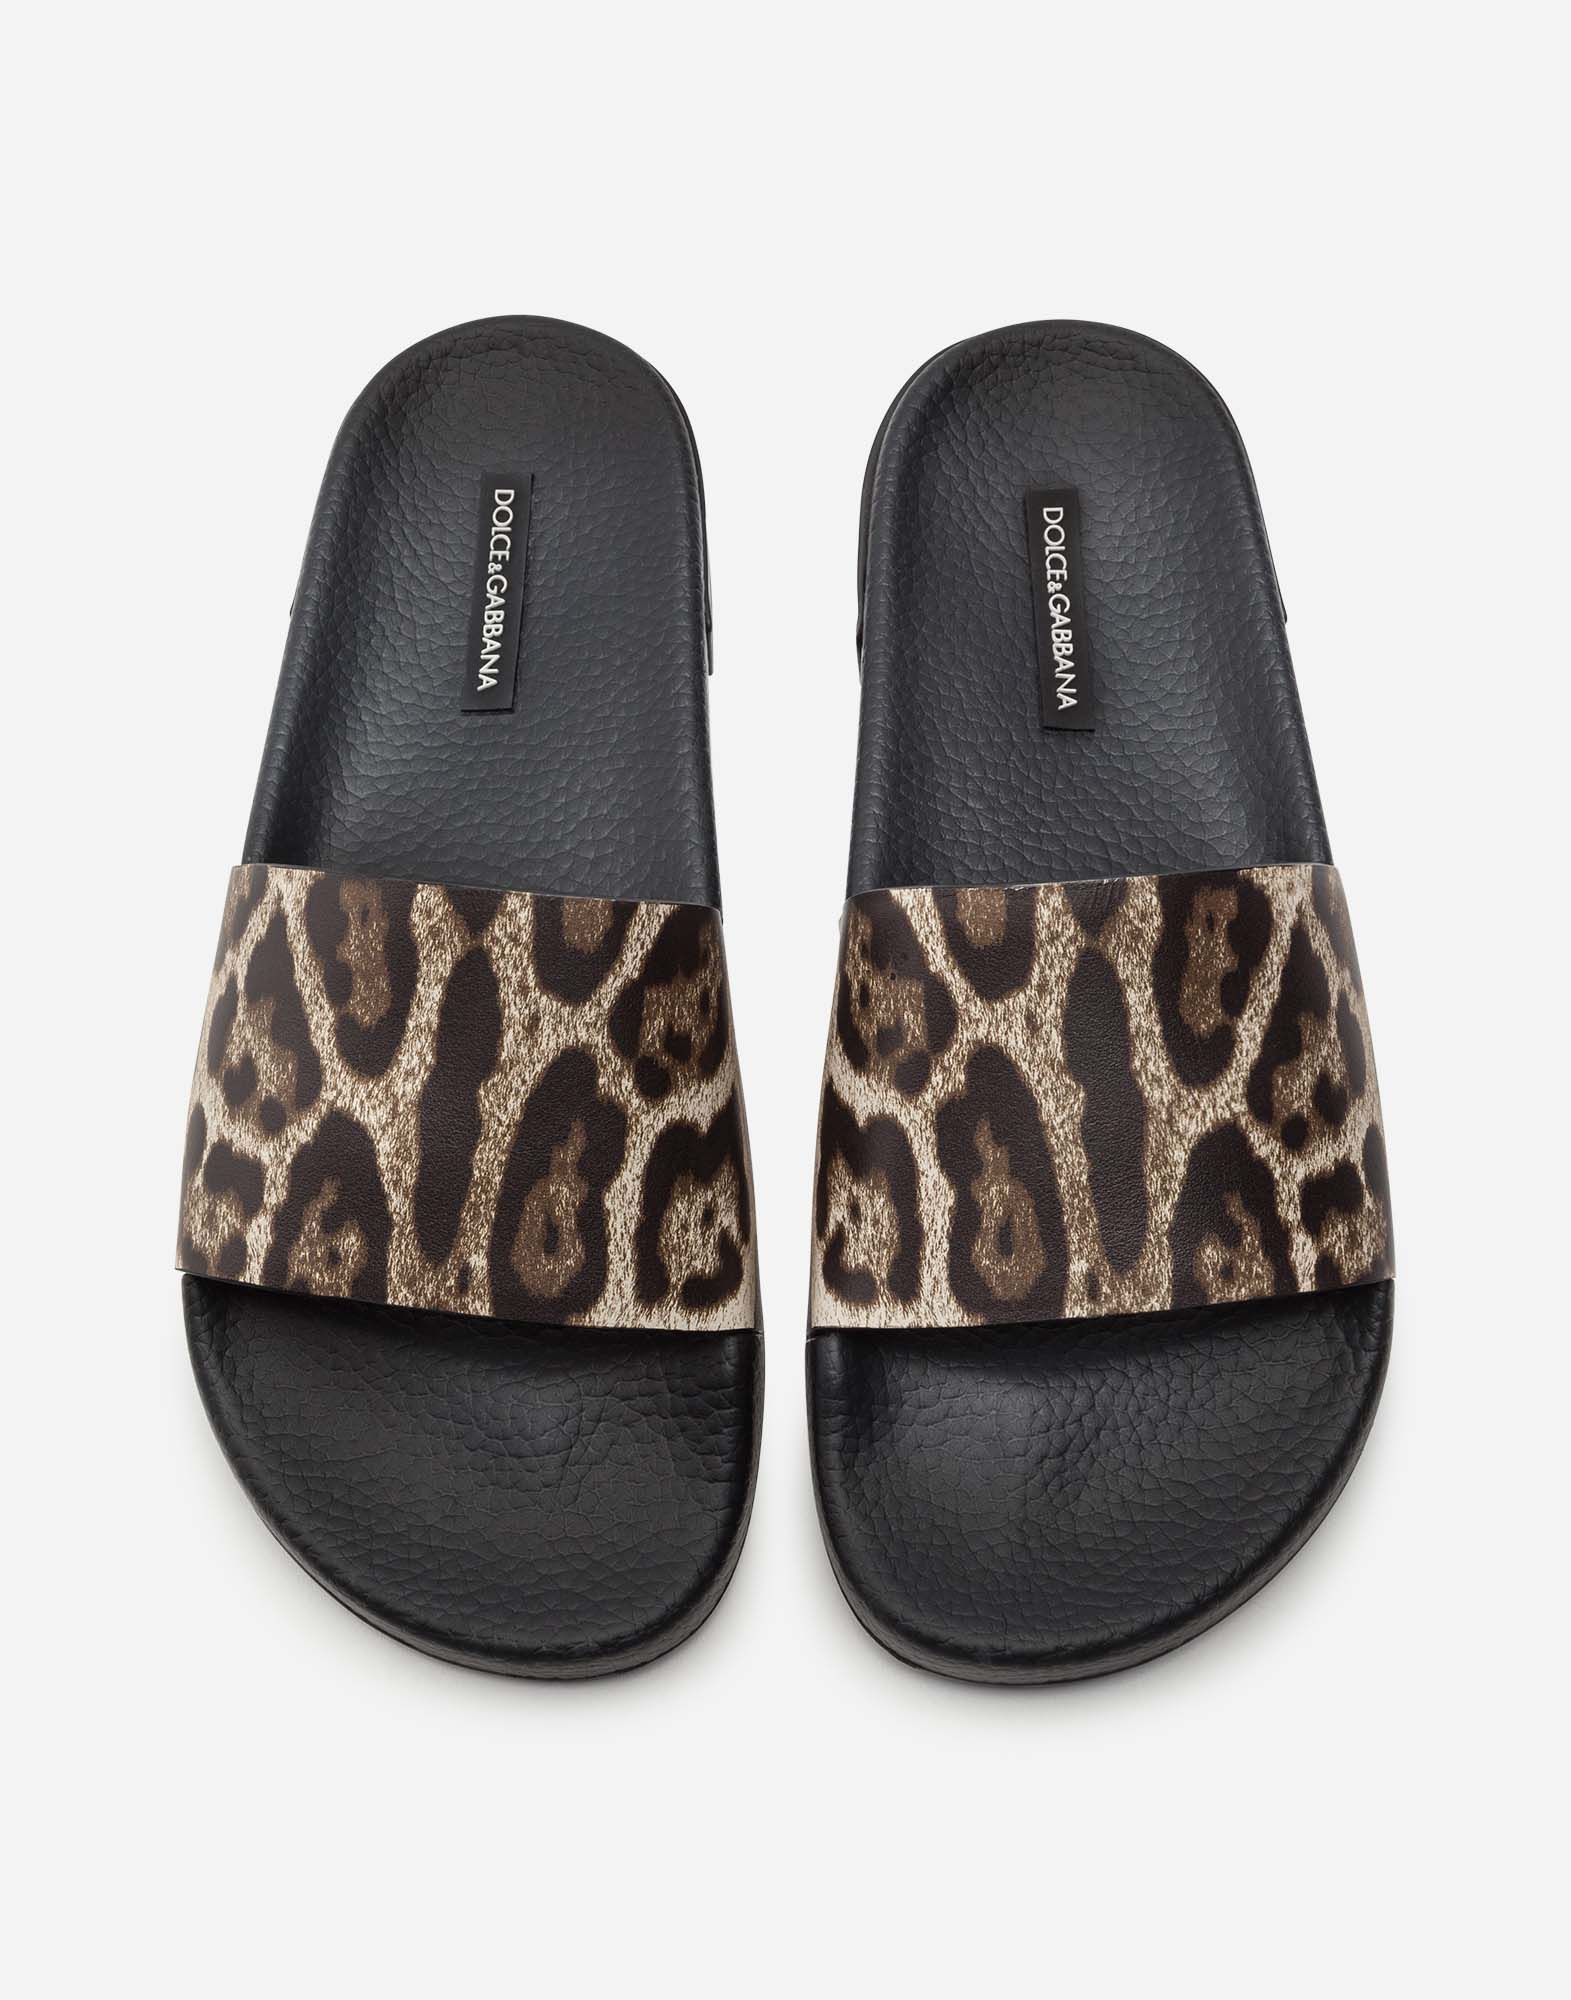 dolce & gabbana leopard and butterfly slide pool sandals